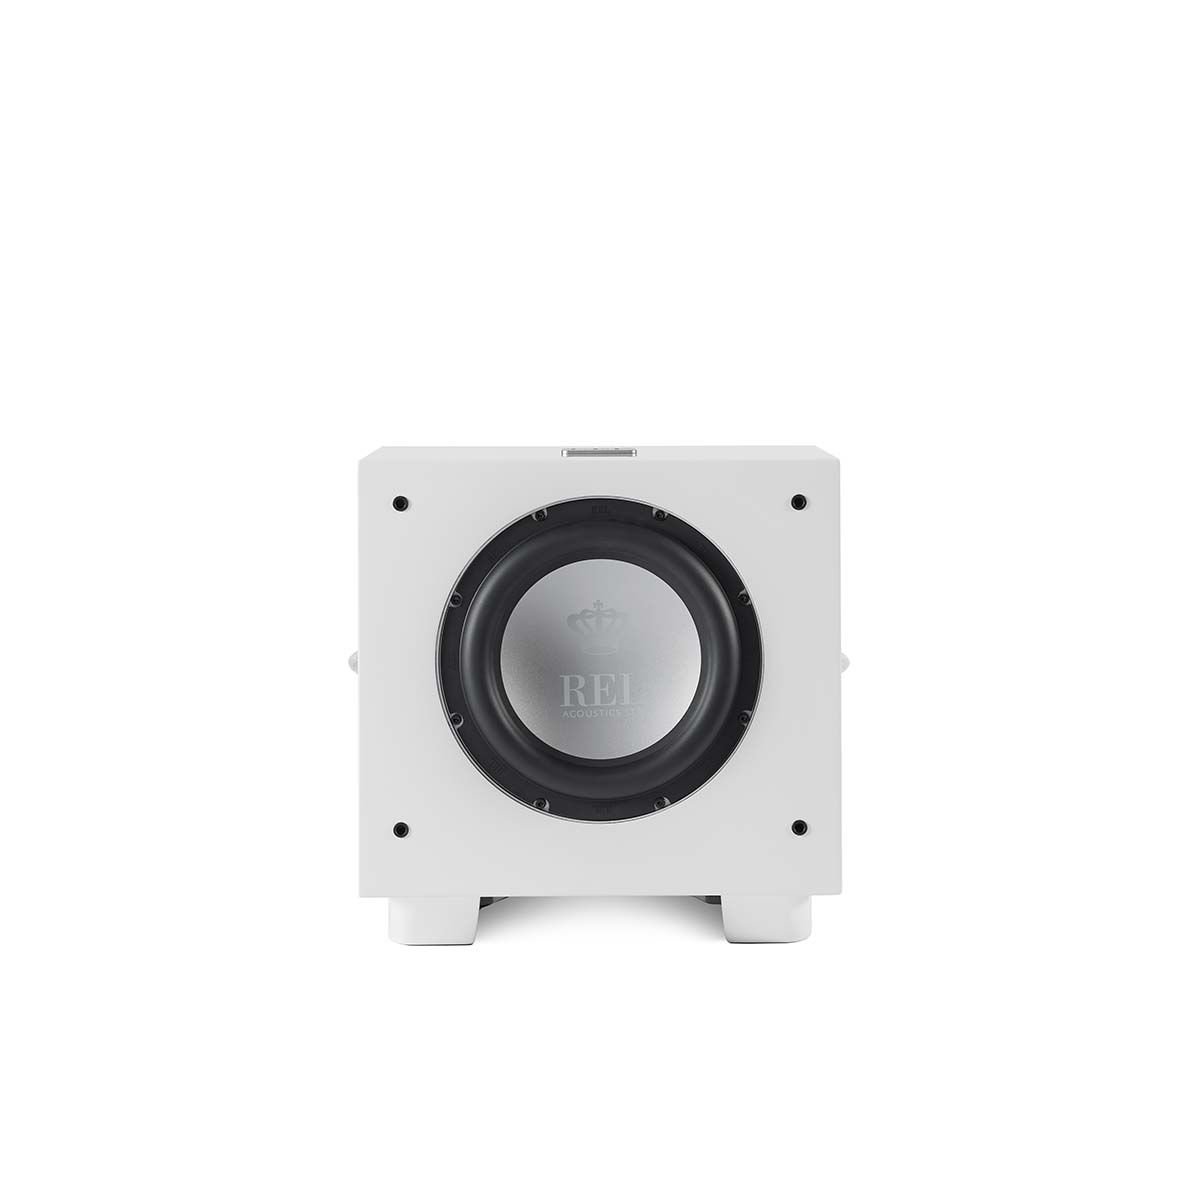 REL Acoustics S/510 Subwoofer, White, front view without grille